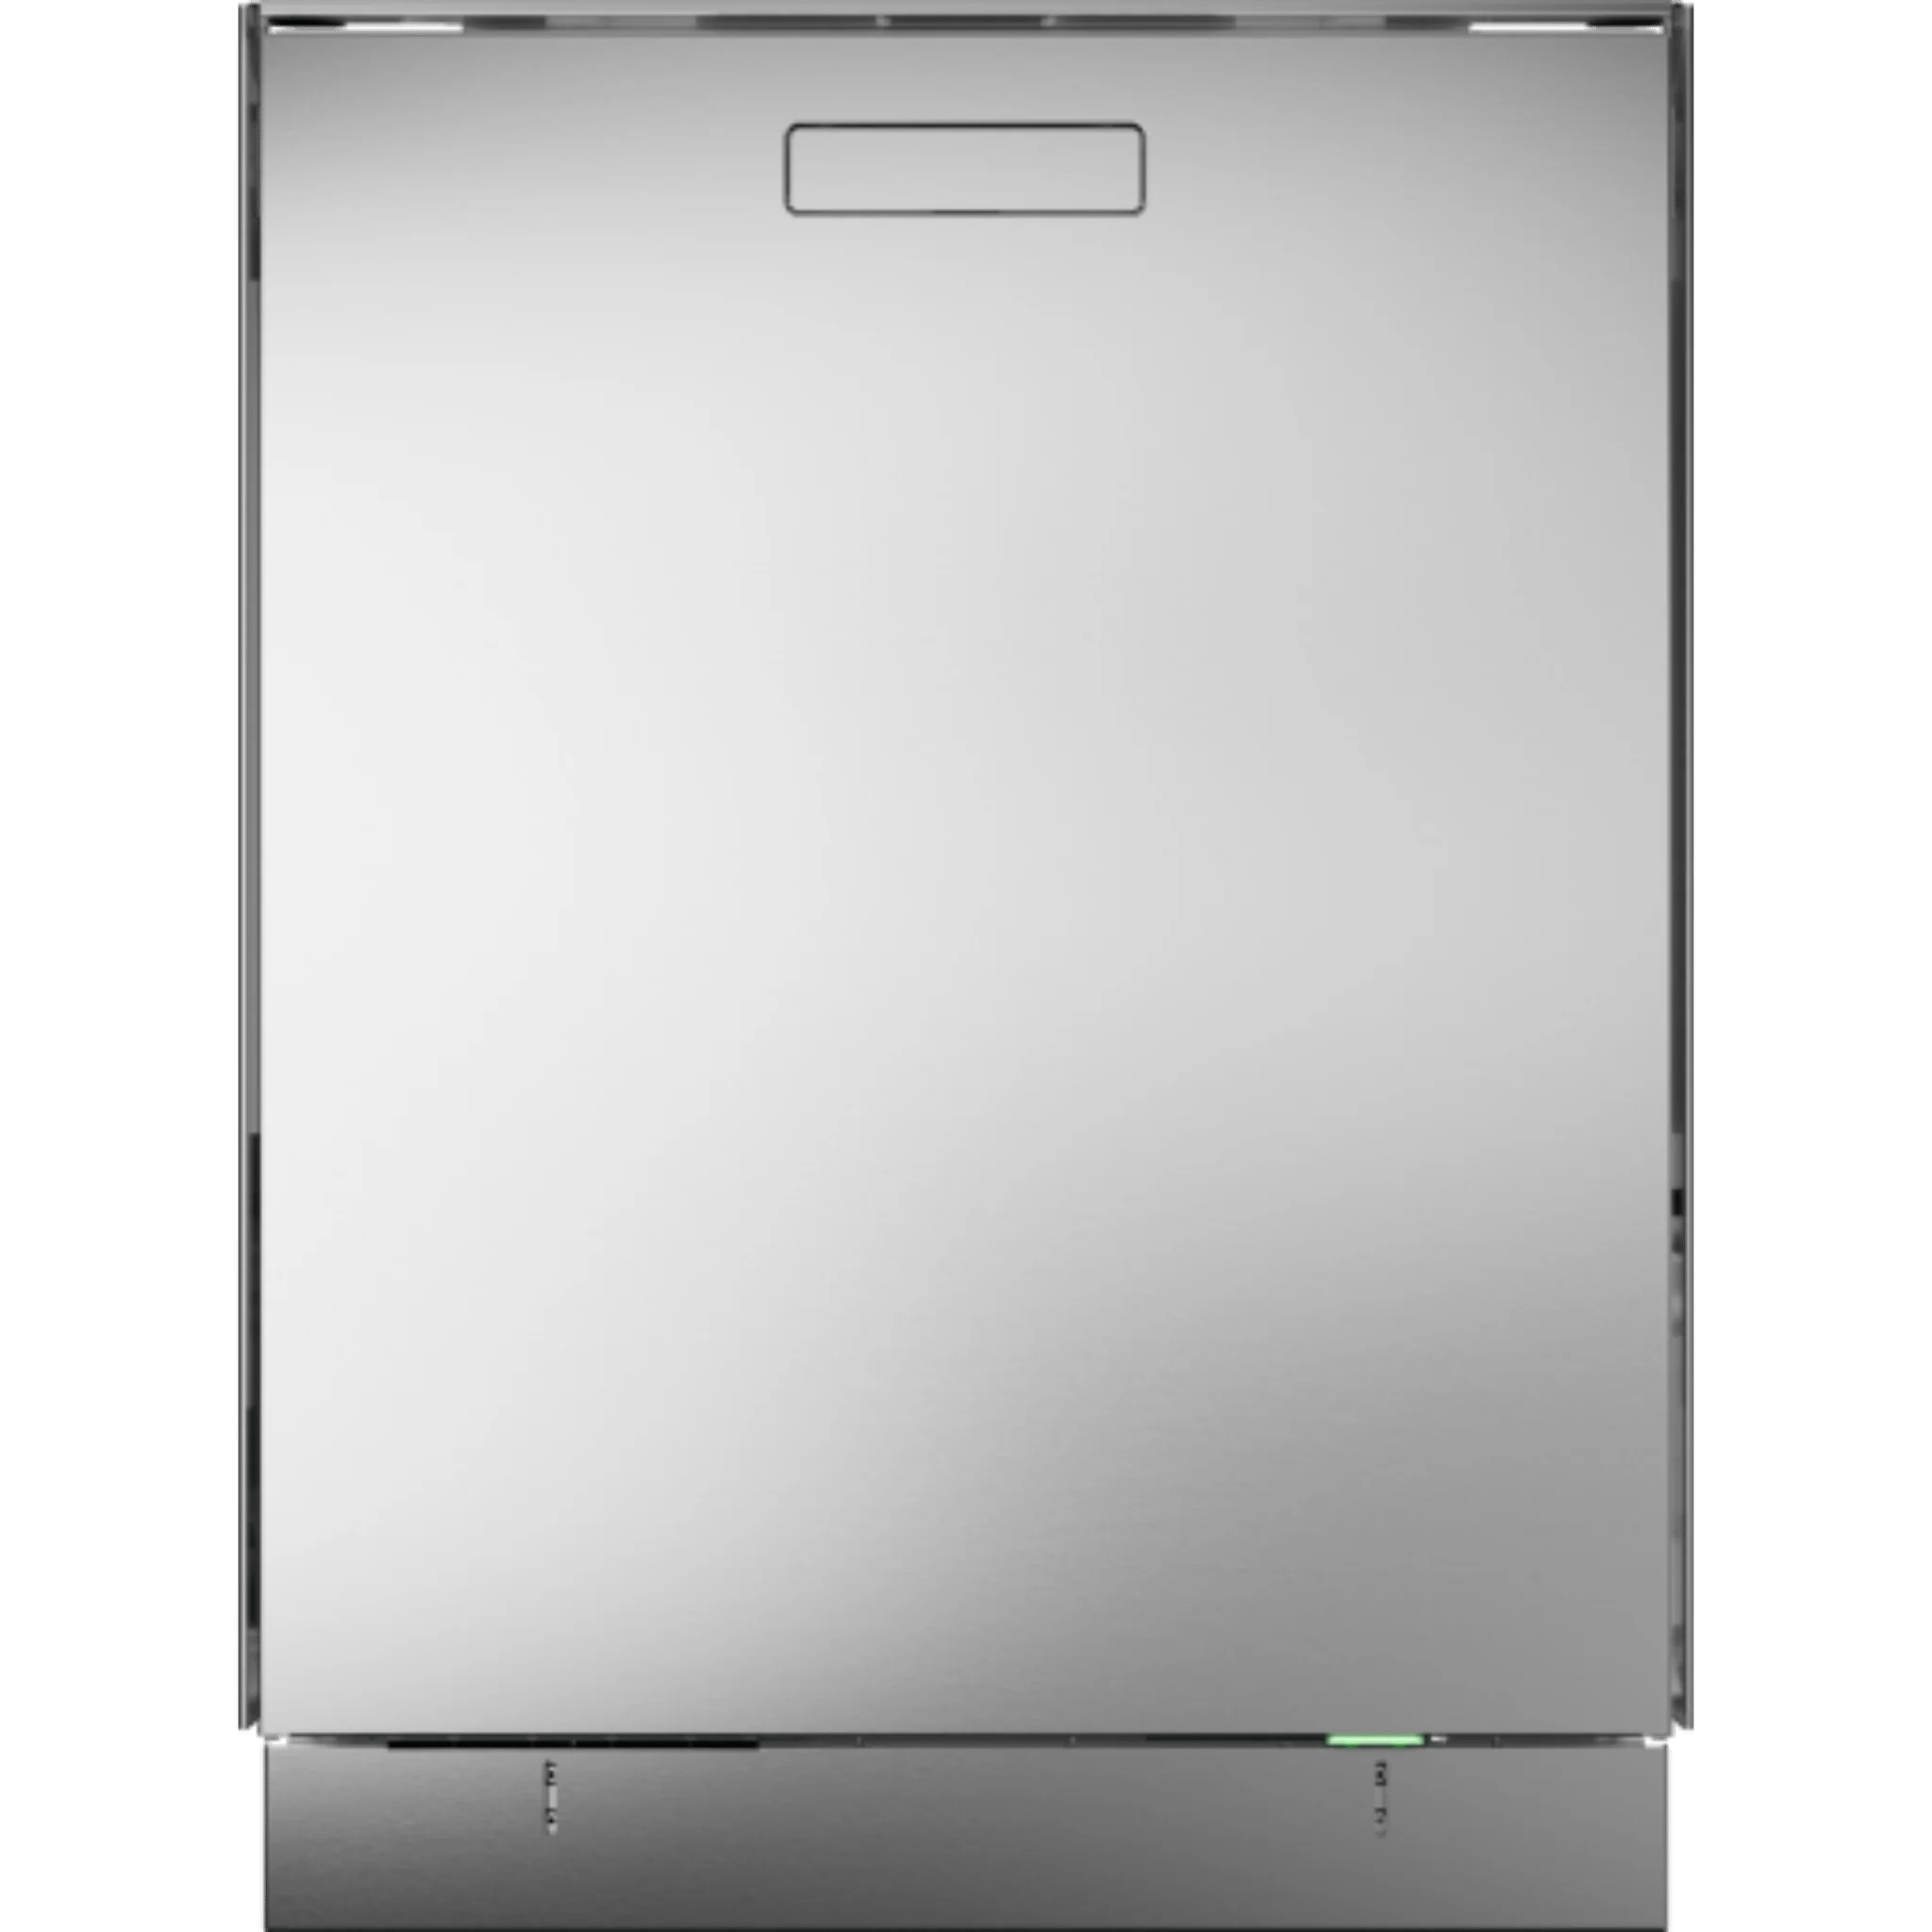 Asko Logic 24 Inch Wide 16 Place Setting Built-In Top Control Dishwasher with Pocket Handle, Water Softener, and Auto Door Open Drying™ Dishwashers DBI564ISSOF Luxury Appliances Direct